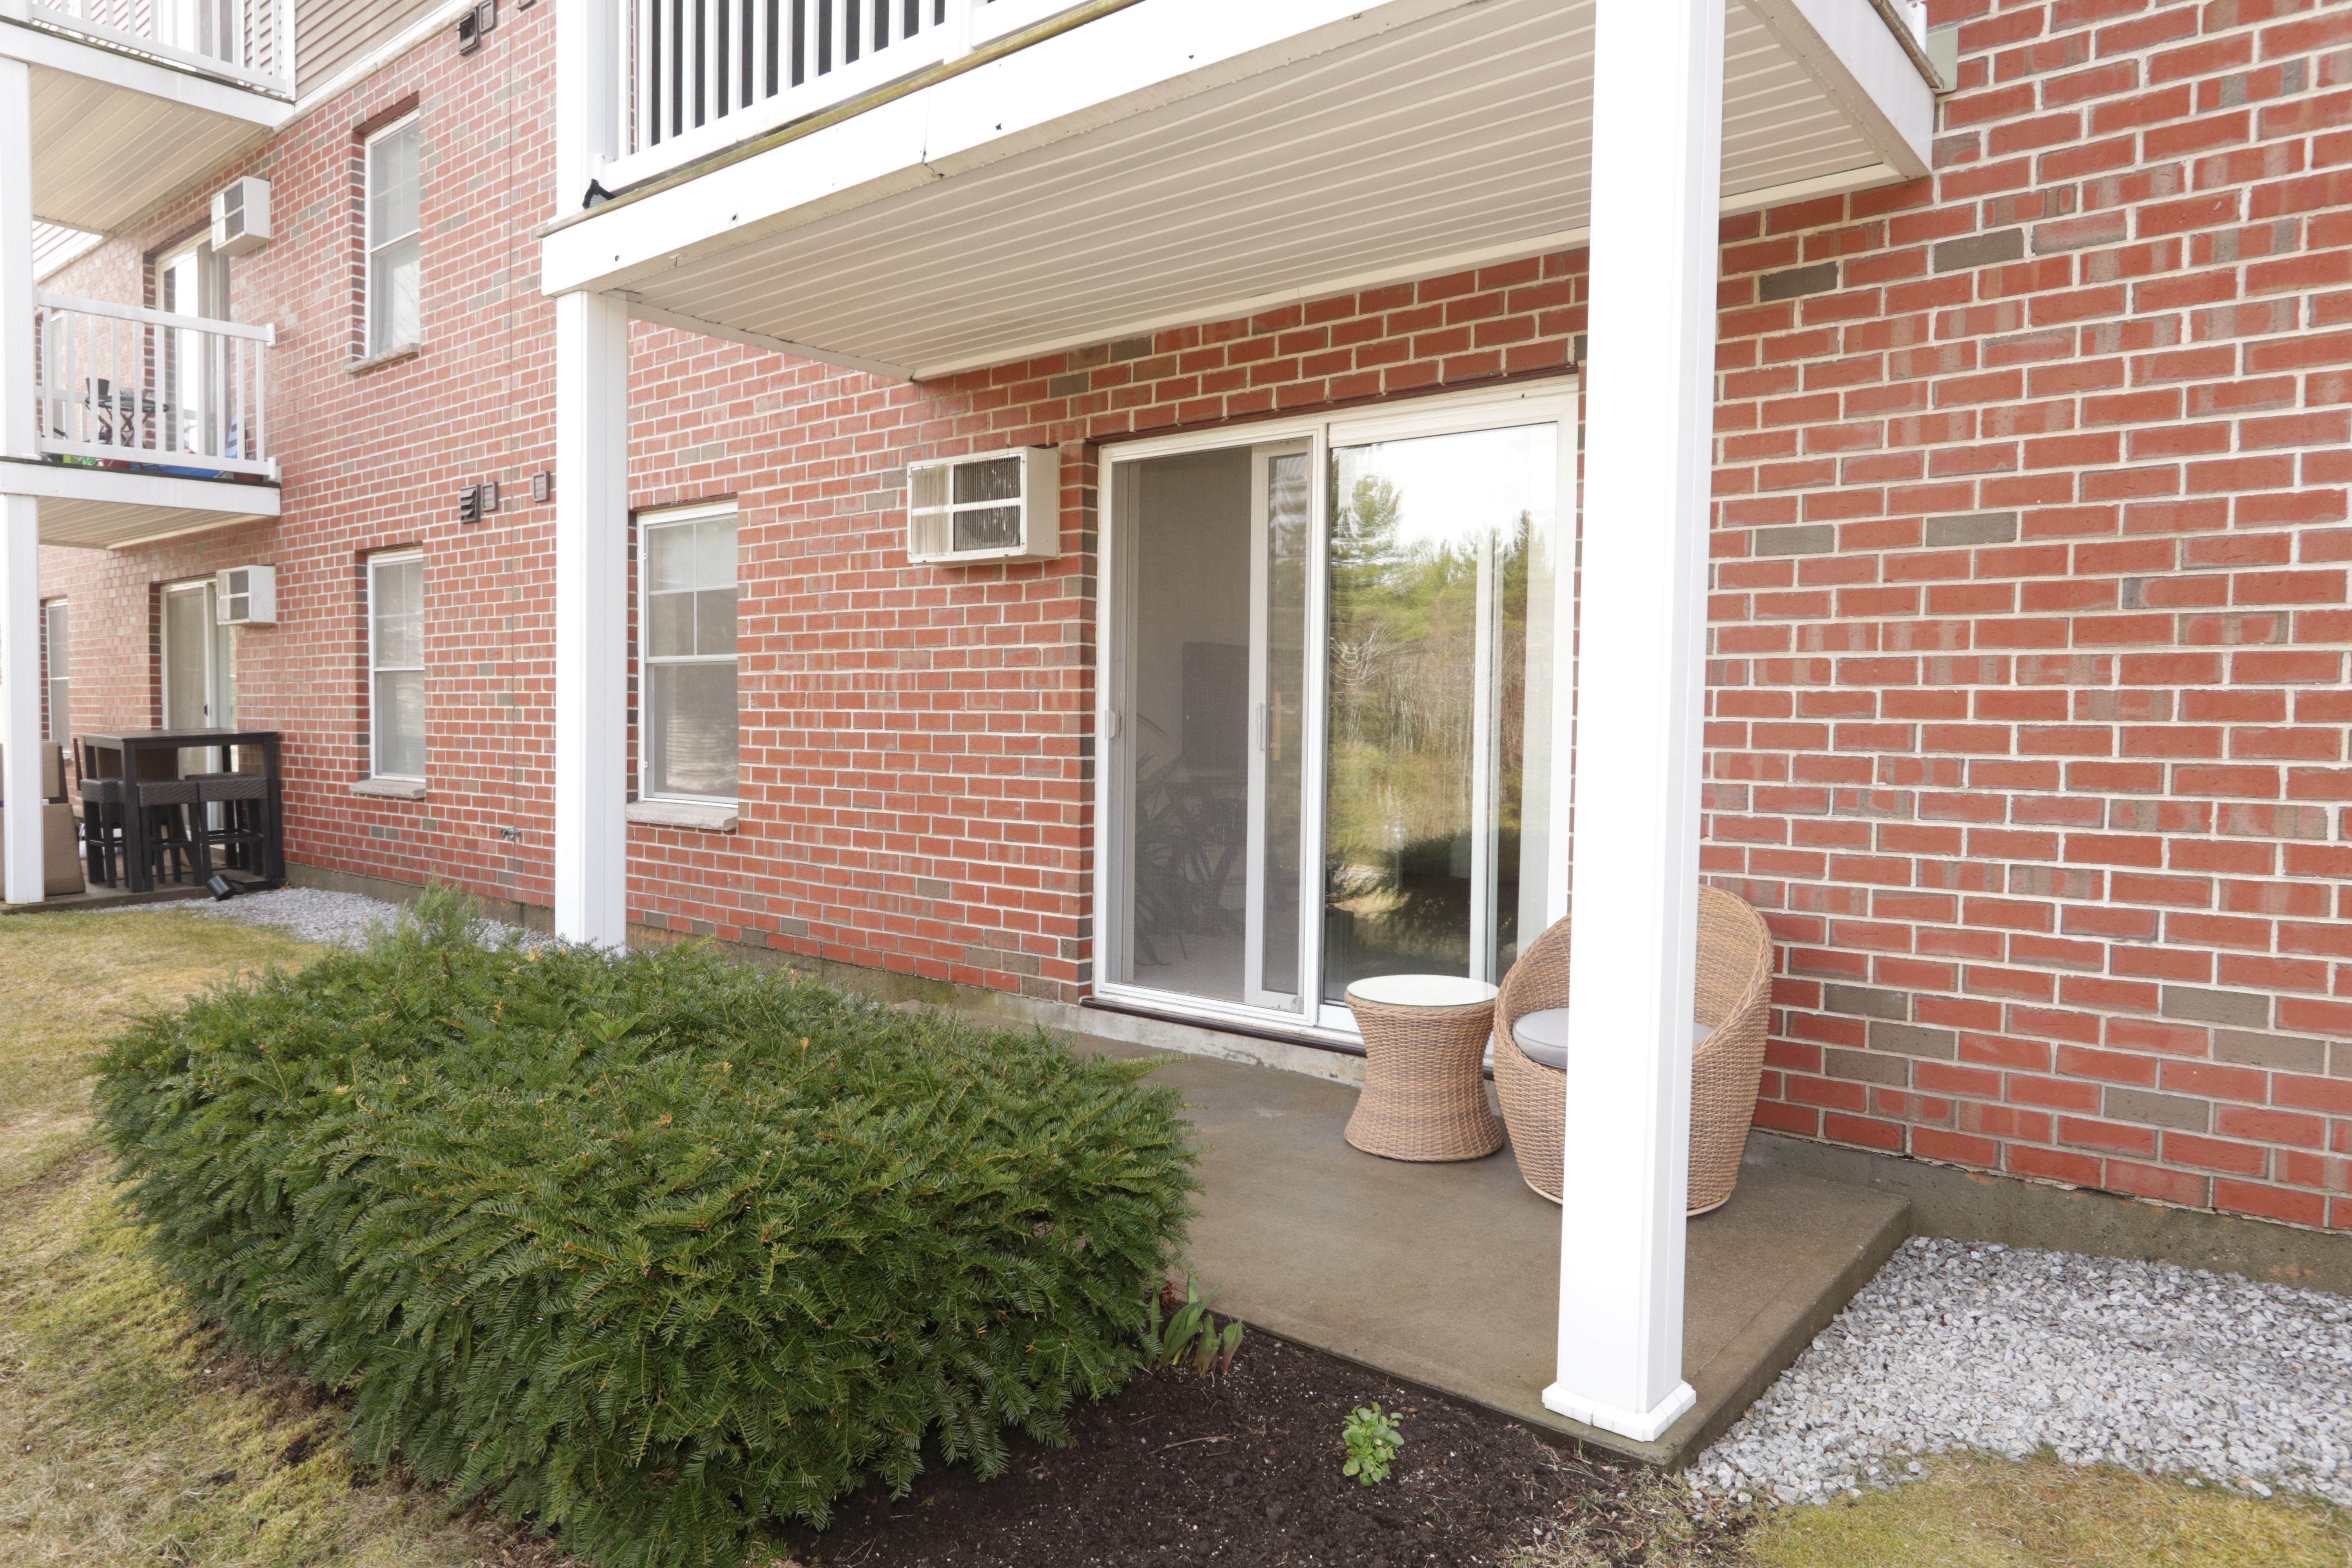 Milford condo for sale at Quarrywood Green 59 Ponemah Hill Rd Apt 2-LL2 Milford NH 03055patio 2